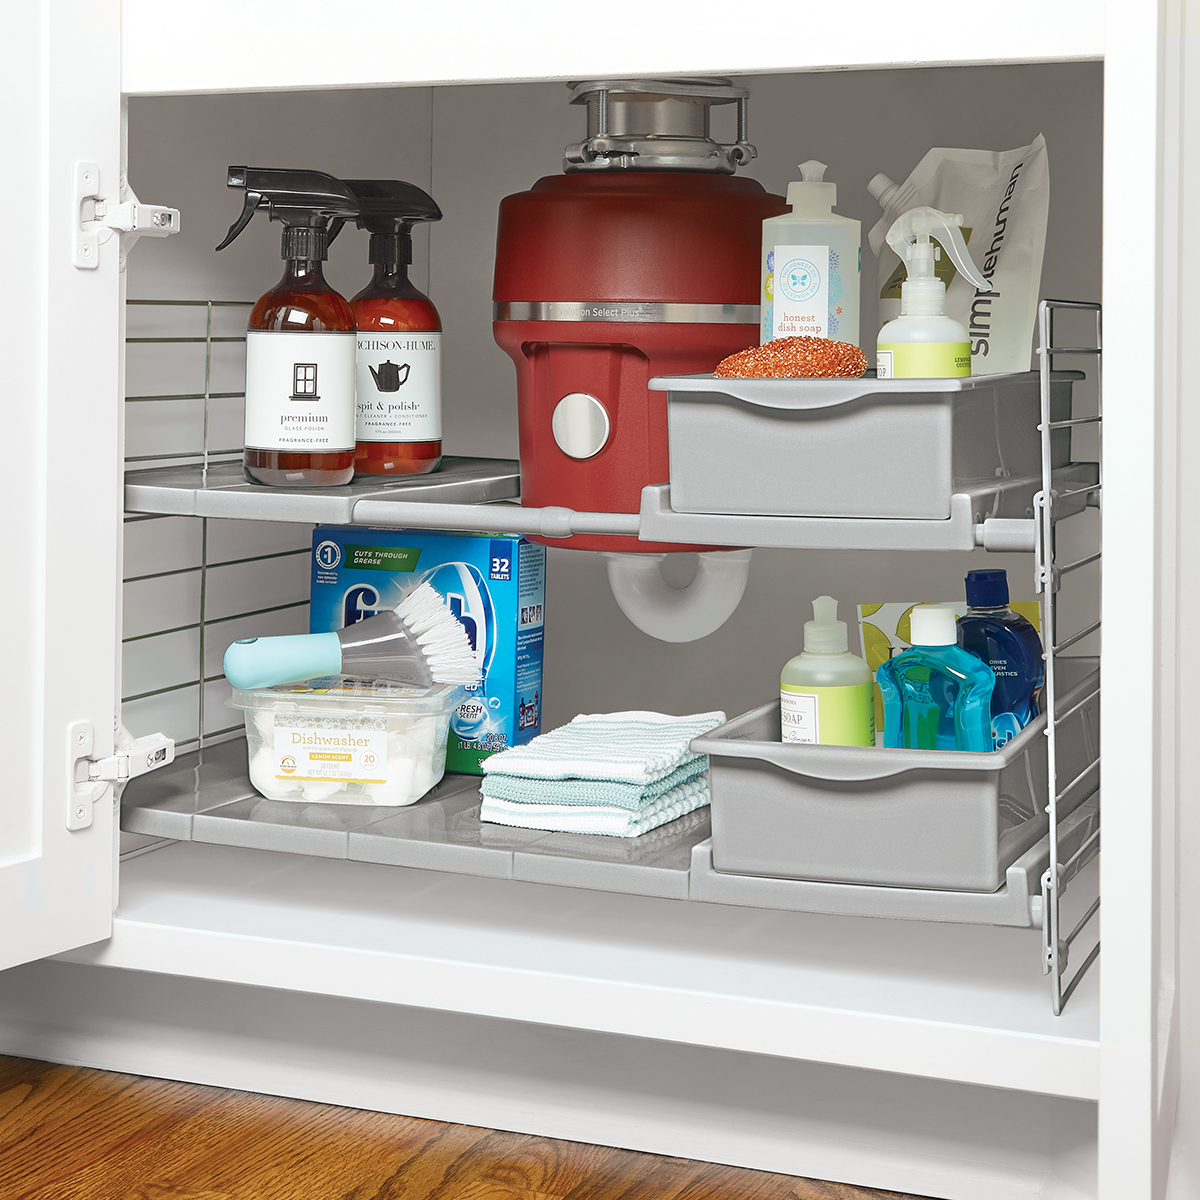 https://www.containerstore.com/catalogimages/420383/10077660-Iris-Expandable-Undersink-O.jpg